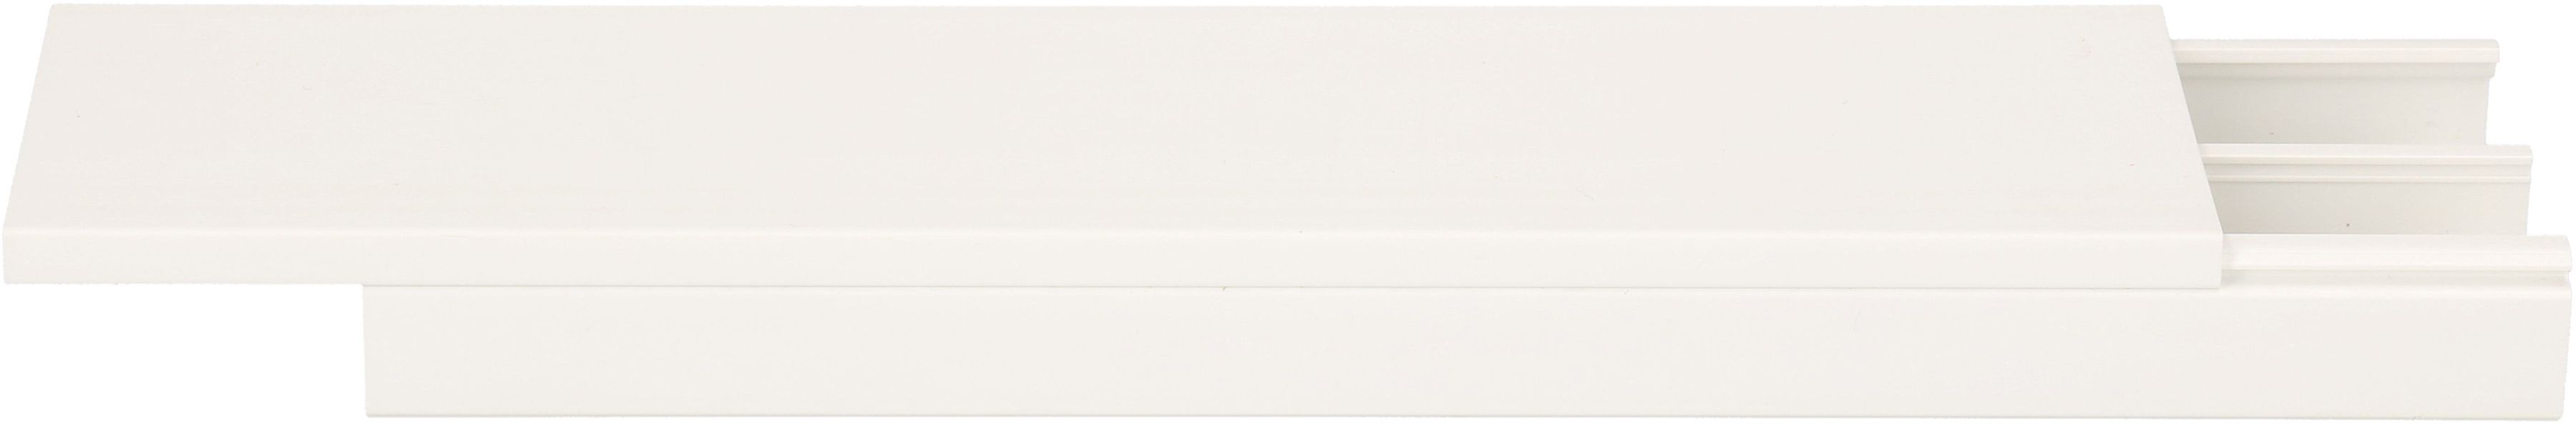 Cable duct 53x20mm white